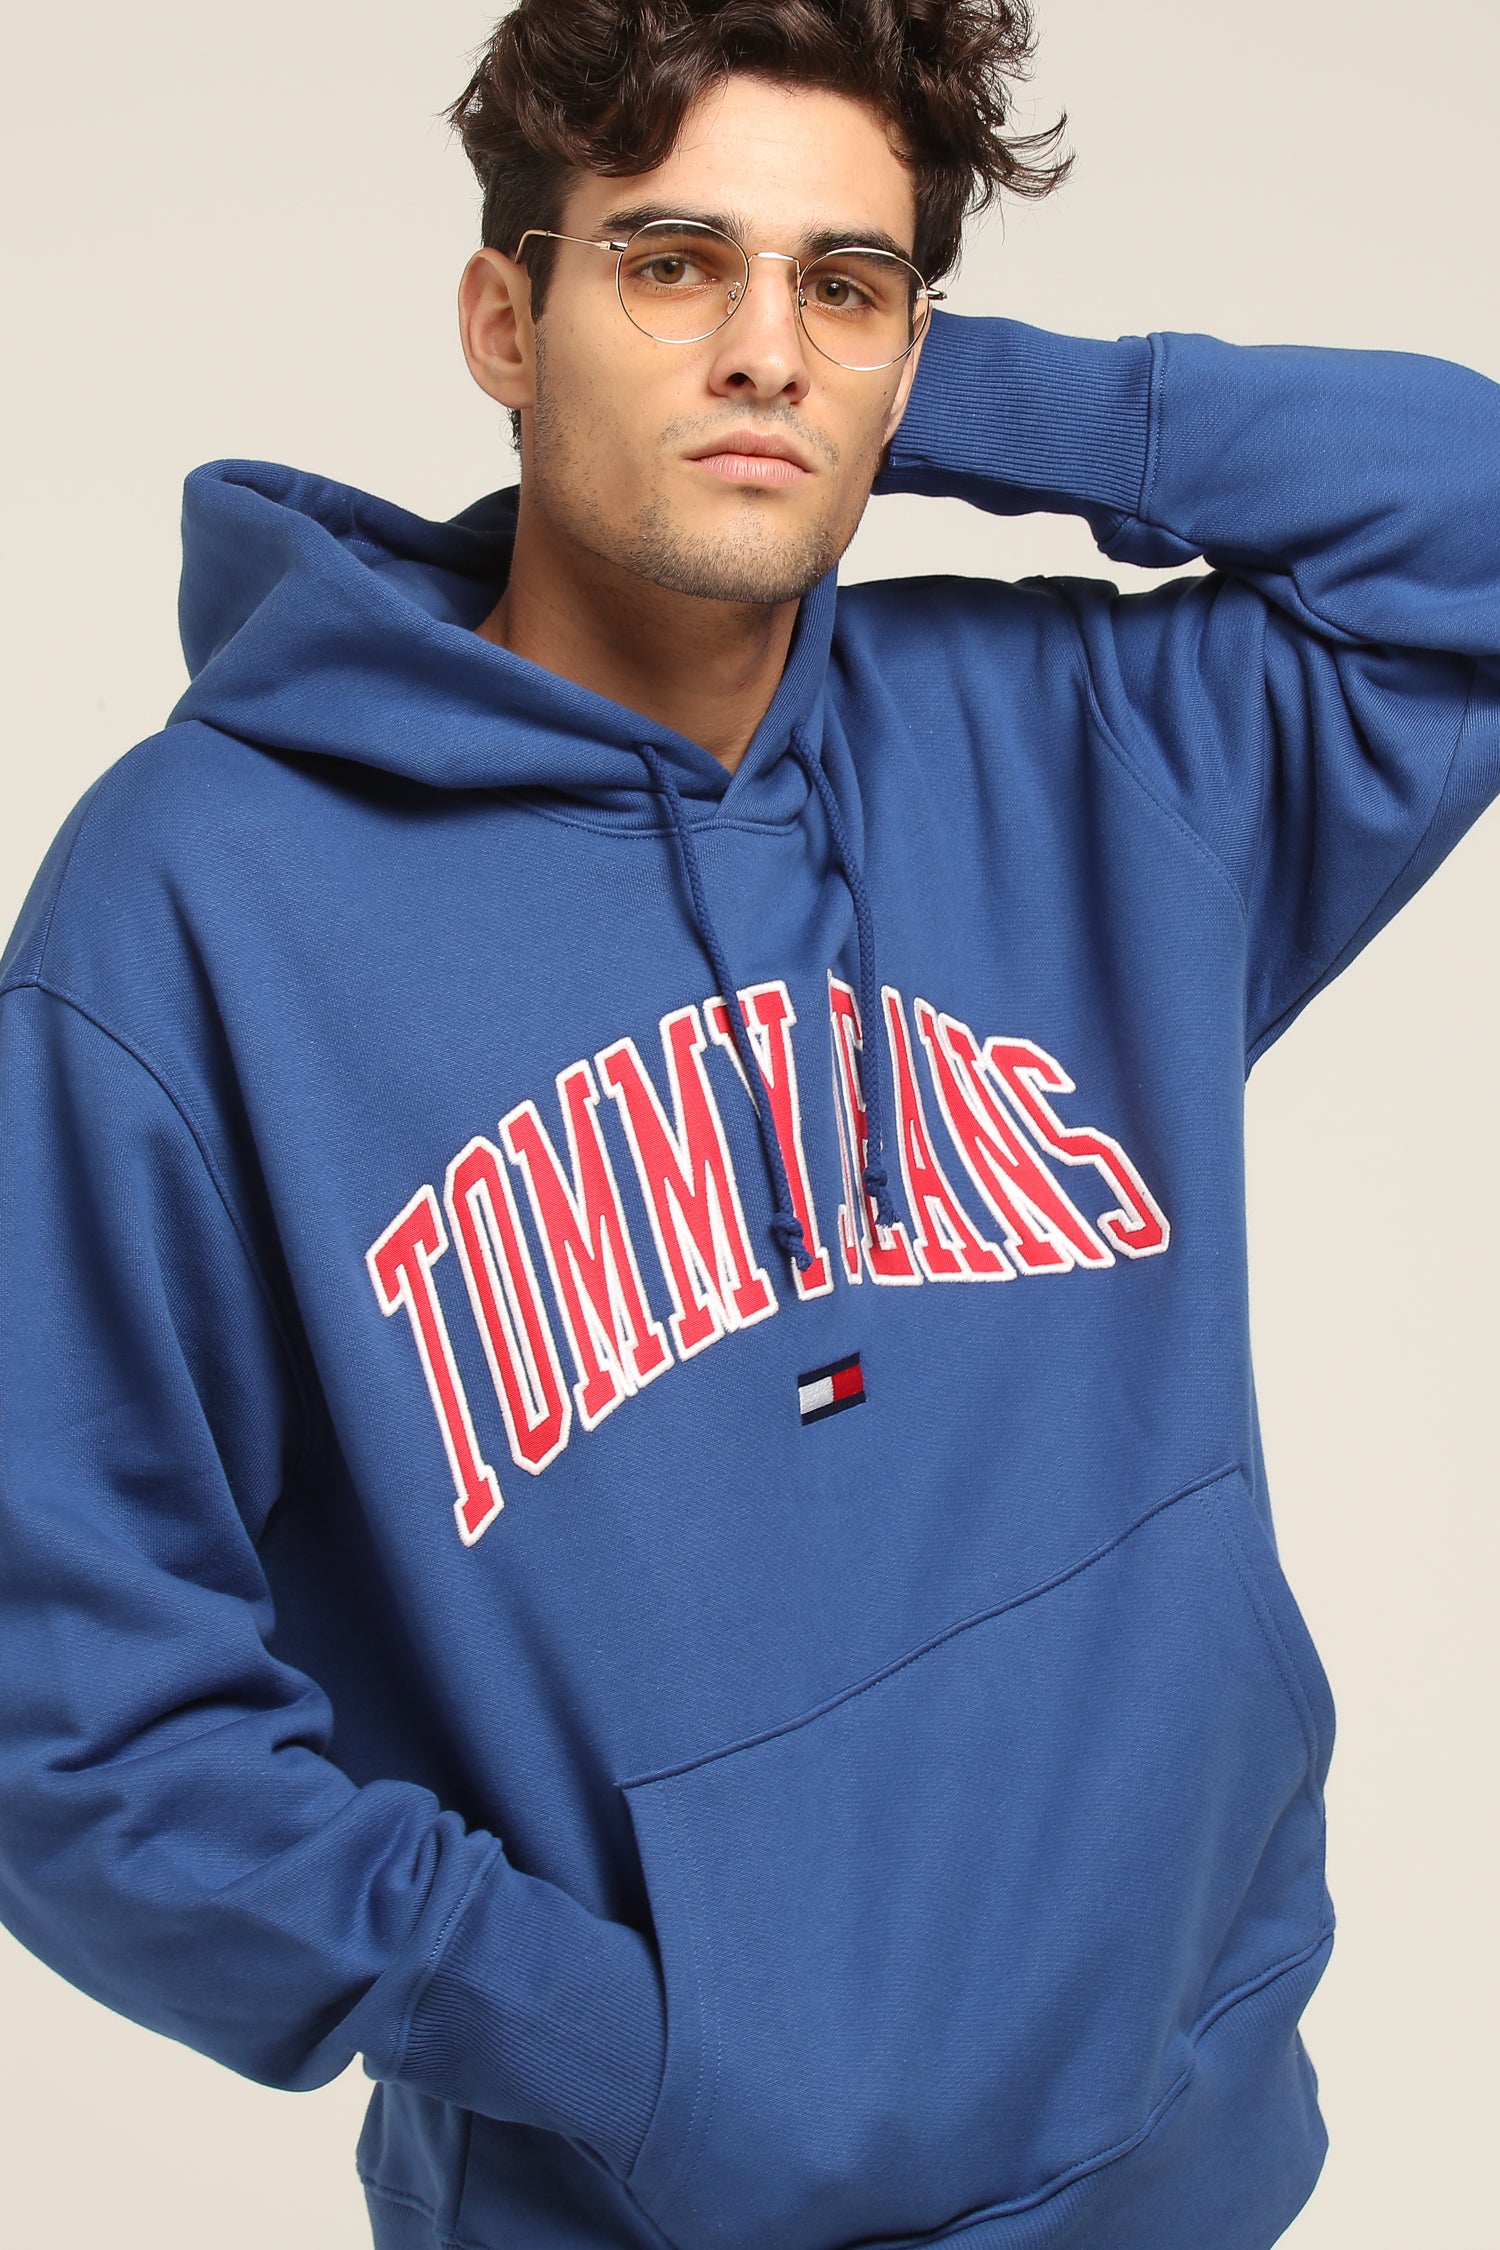 tommy jeans clean collegiate sweater